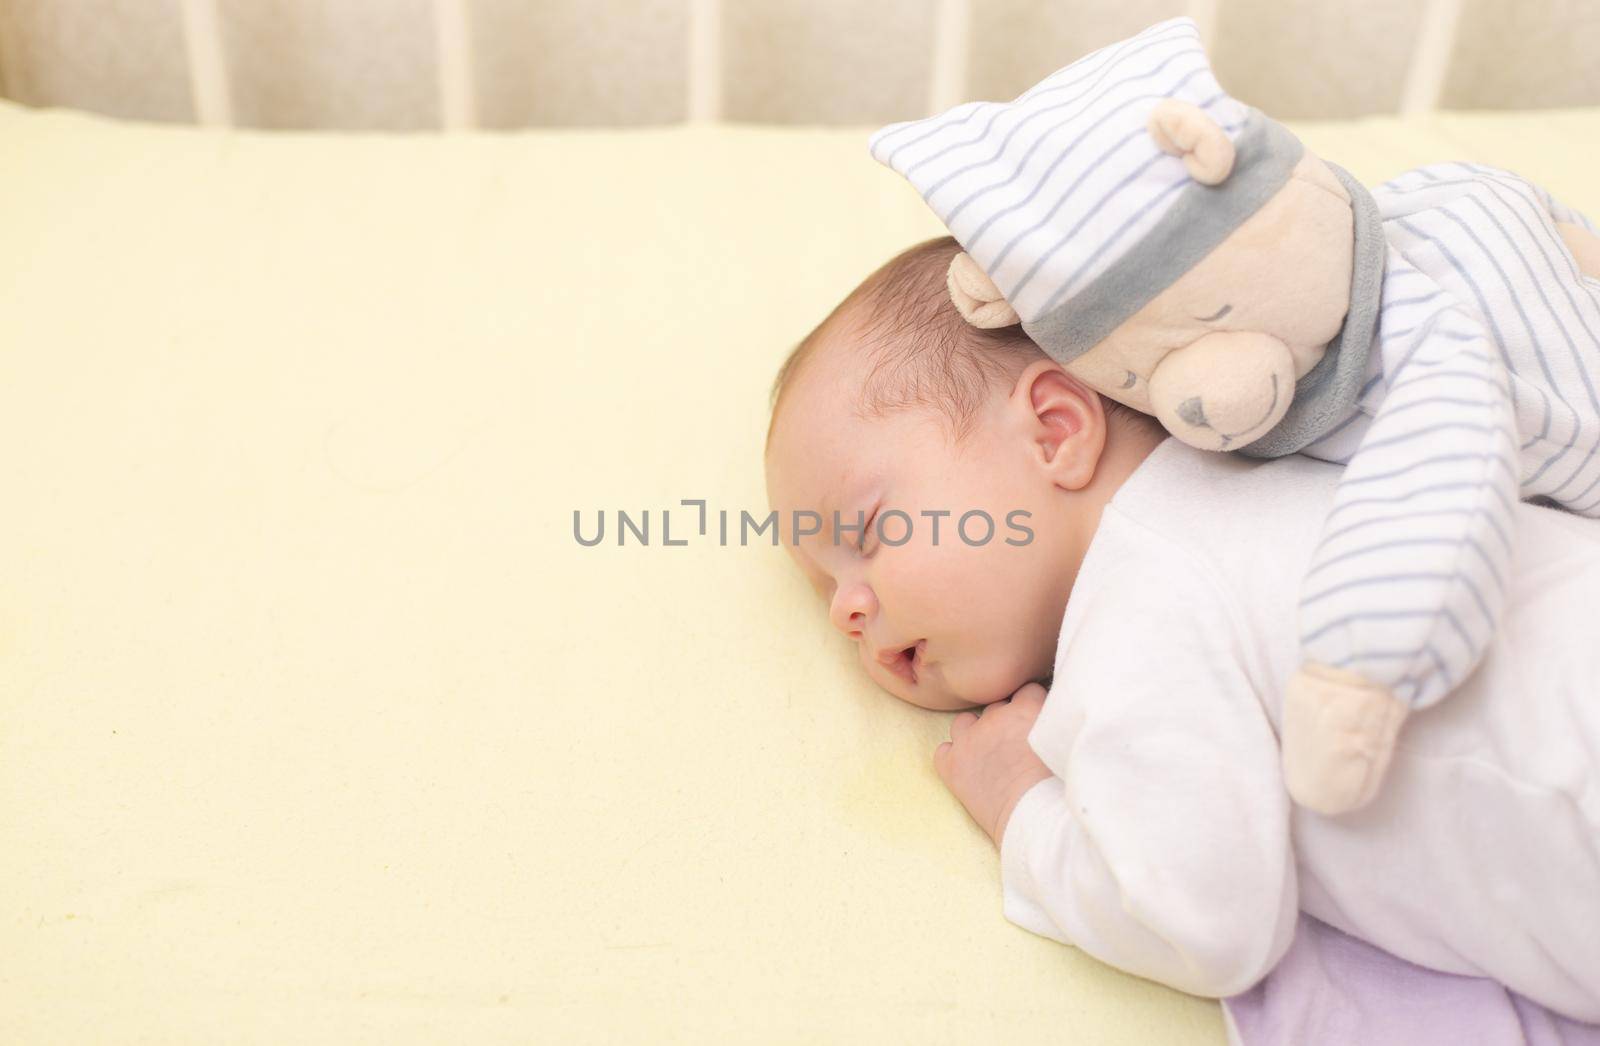 The baby sleeps in the copy space crib . Advertising of children's goods. Illustrating children's articles. A small child. A newborn. A child's dream.